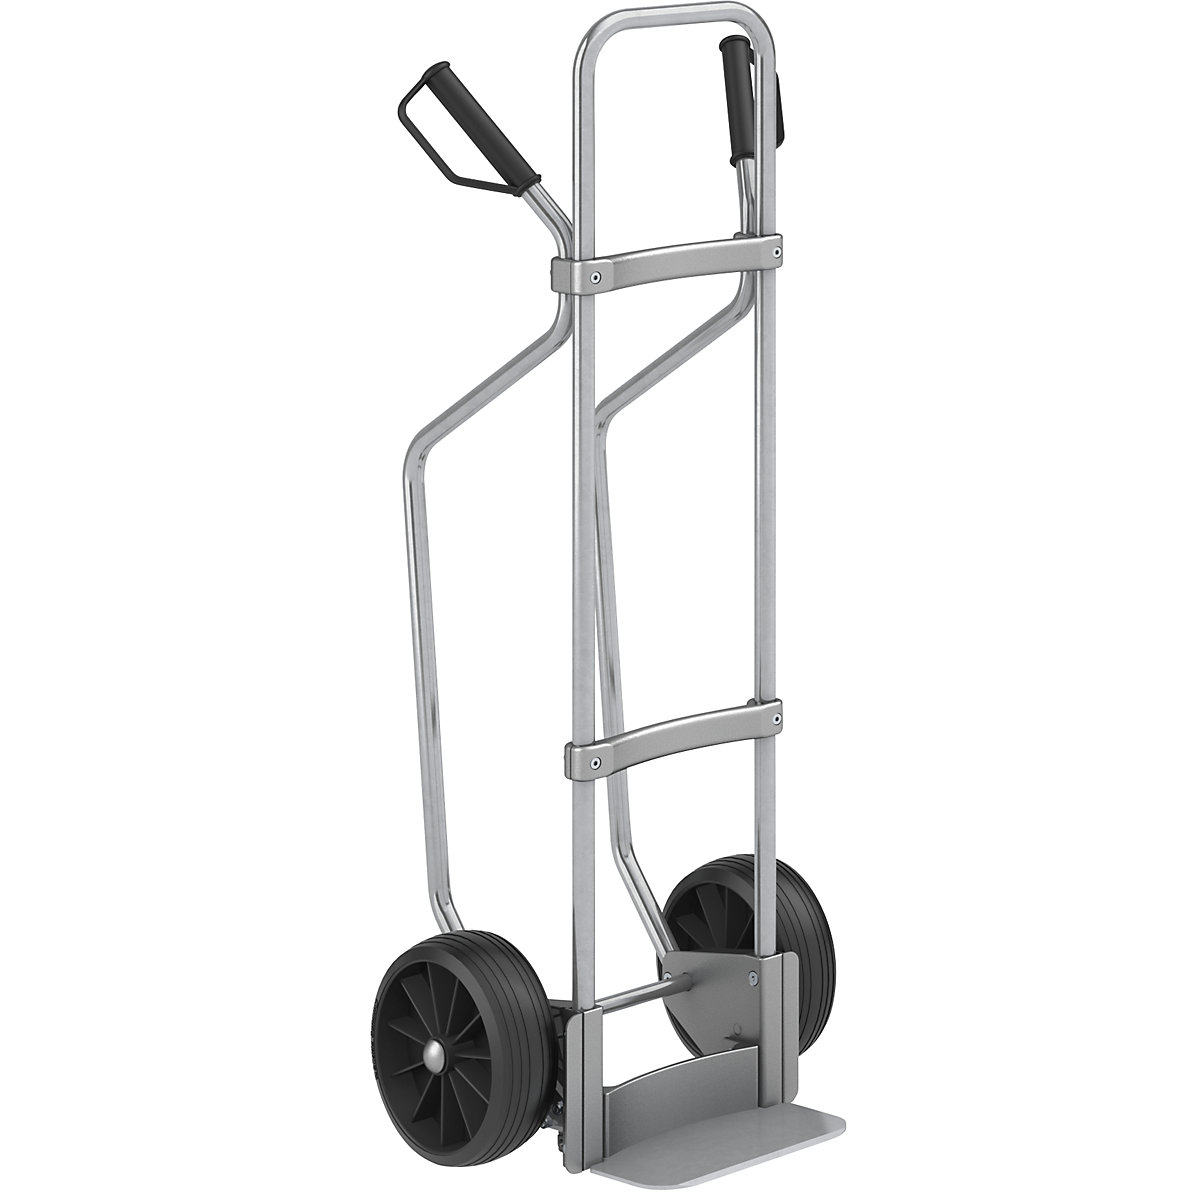 Sack truck with runners, zinc plated – eurokraft pro, footplate WxD 280 x 140 mm, zinc plated, solid rubber tyres-1